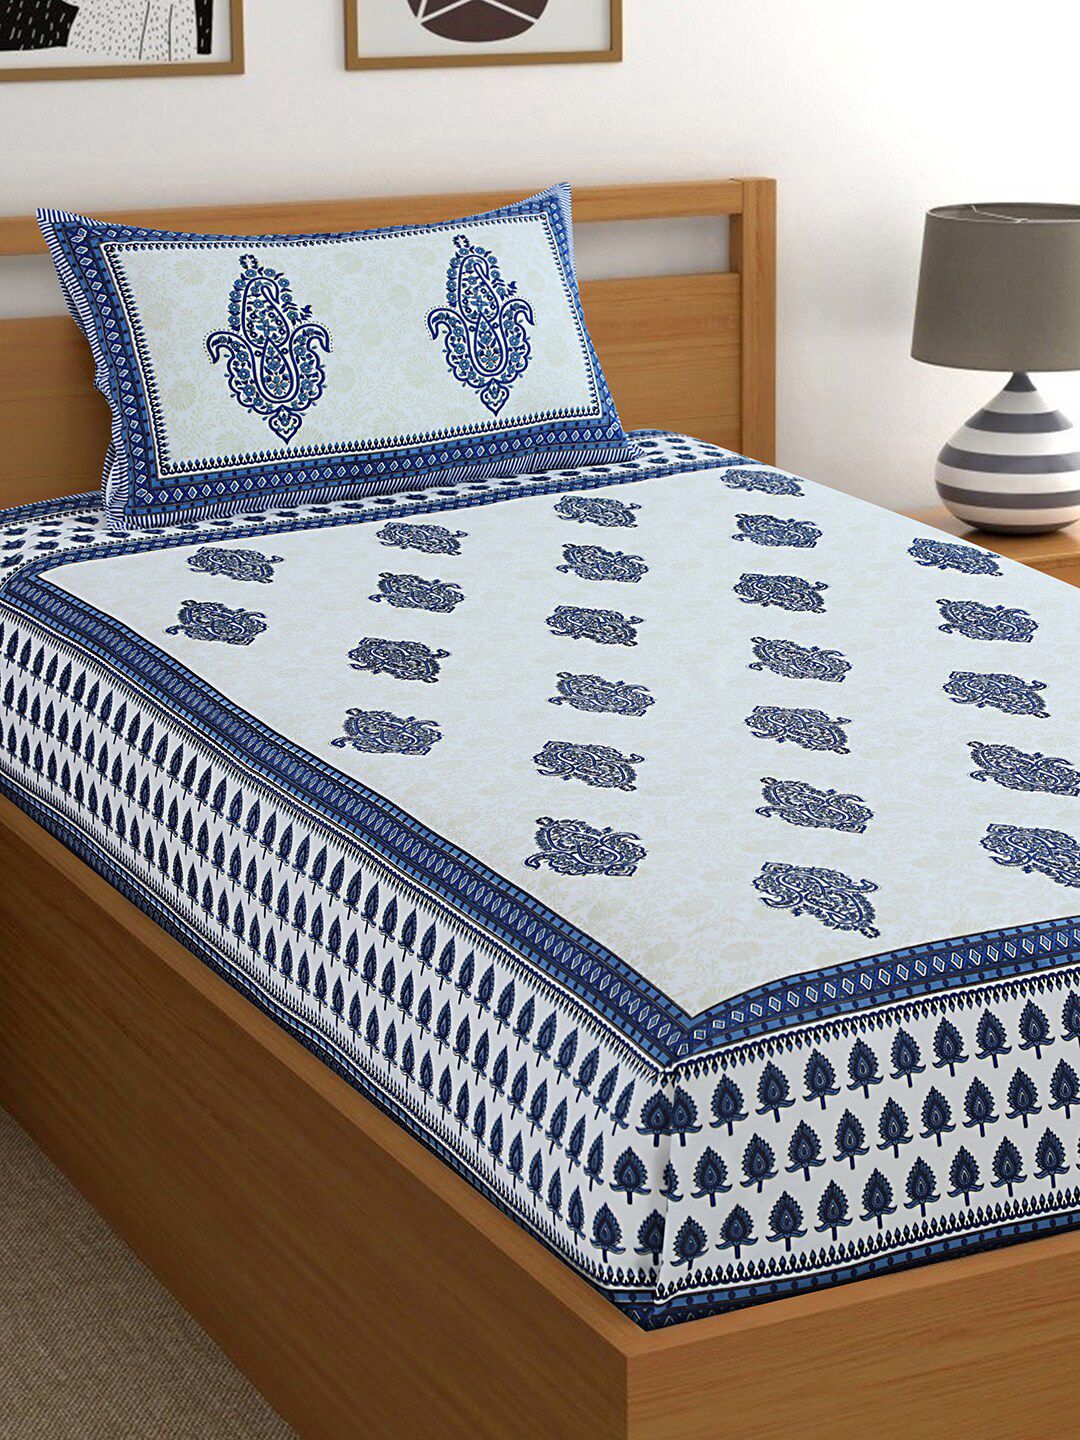 Salona Bichona White & Blue Ethnic Motifs 120 TC Cotton 1 Single Bedsheet with 1 Pillow Covers Price in India